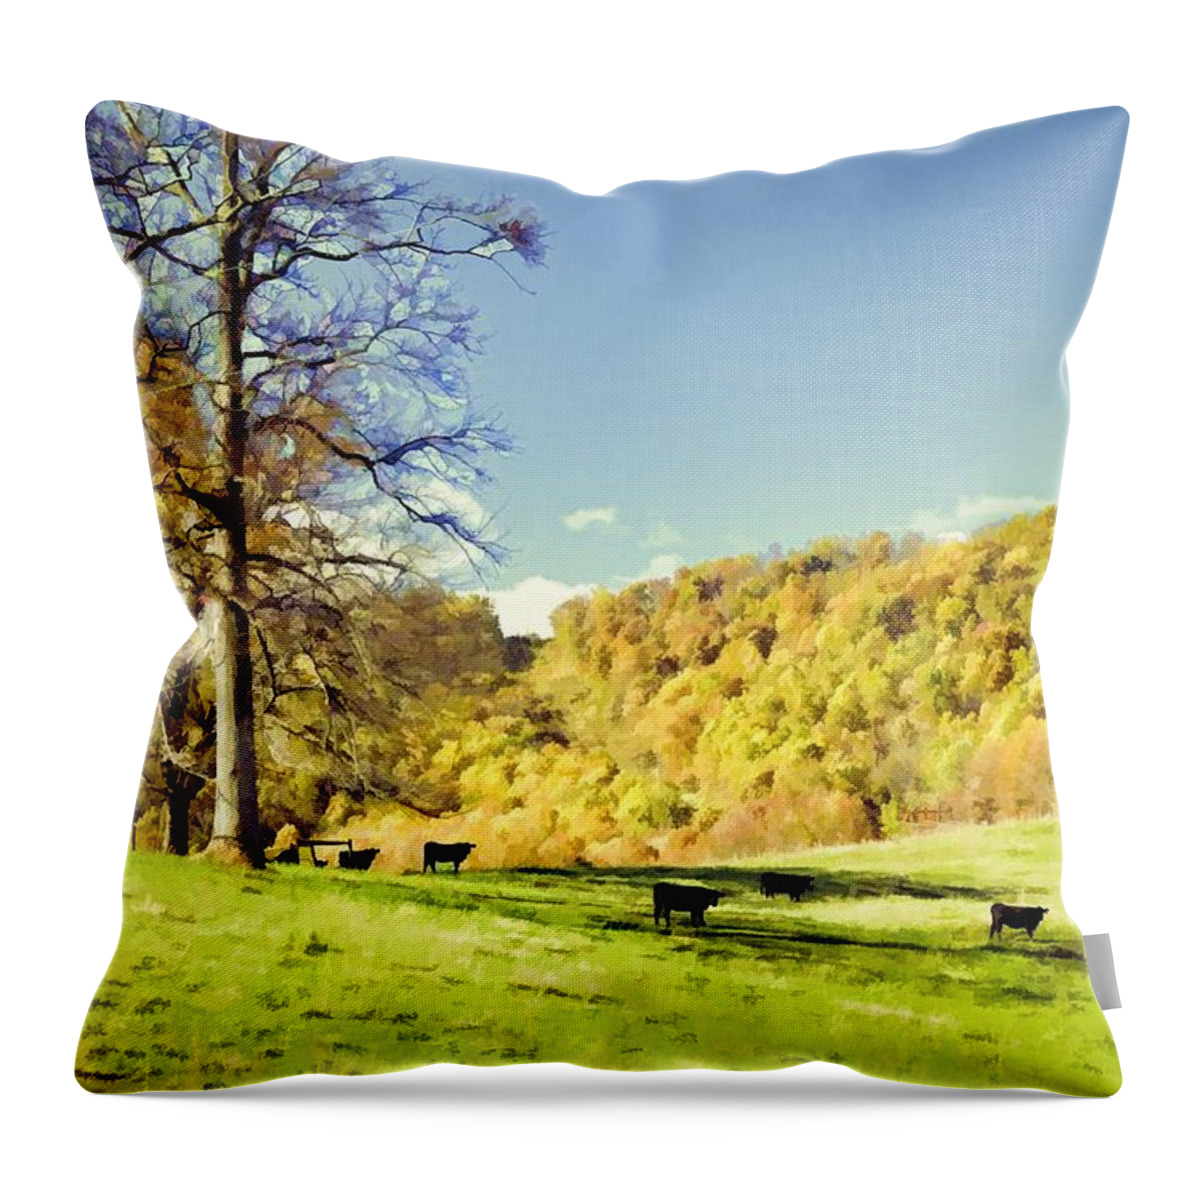 Landscapes Throw Pillow featuring the photograph How Green Was Their Valley by Jan Amiss Photography